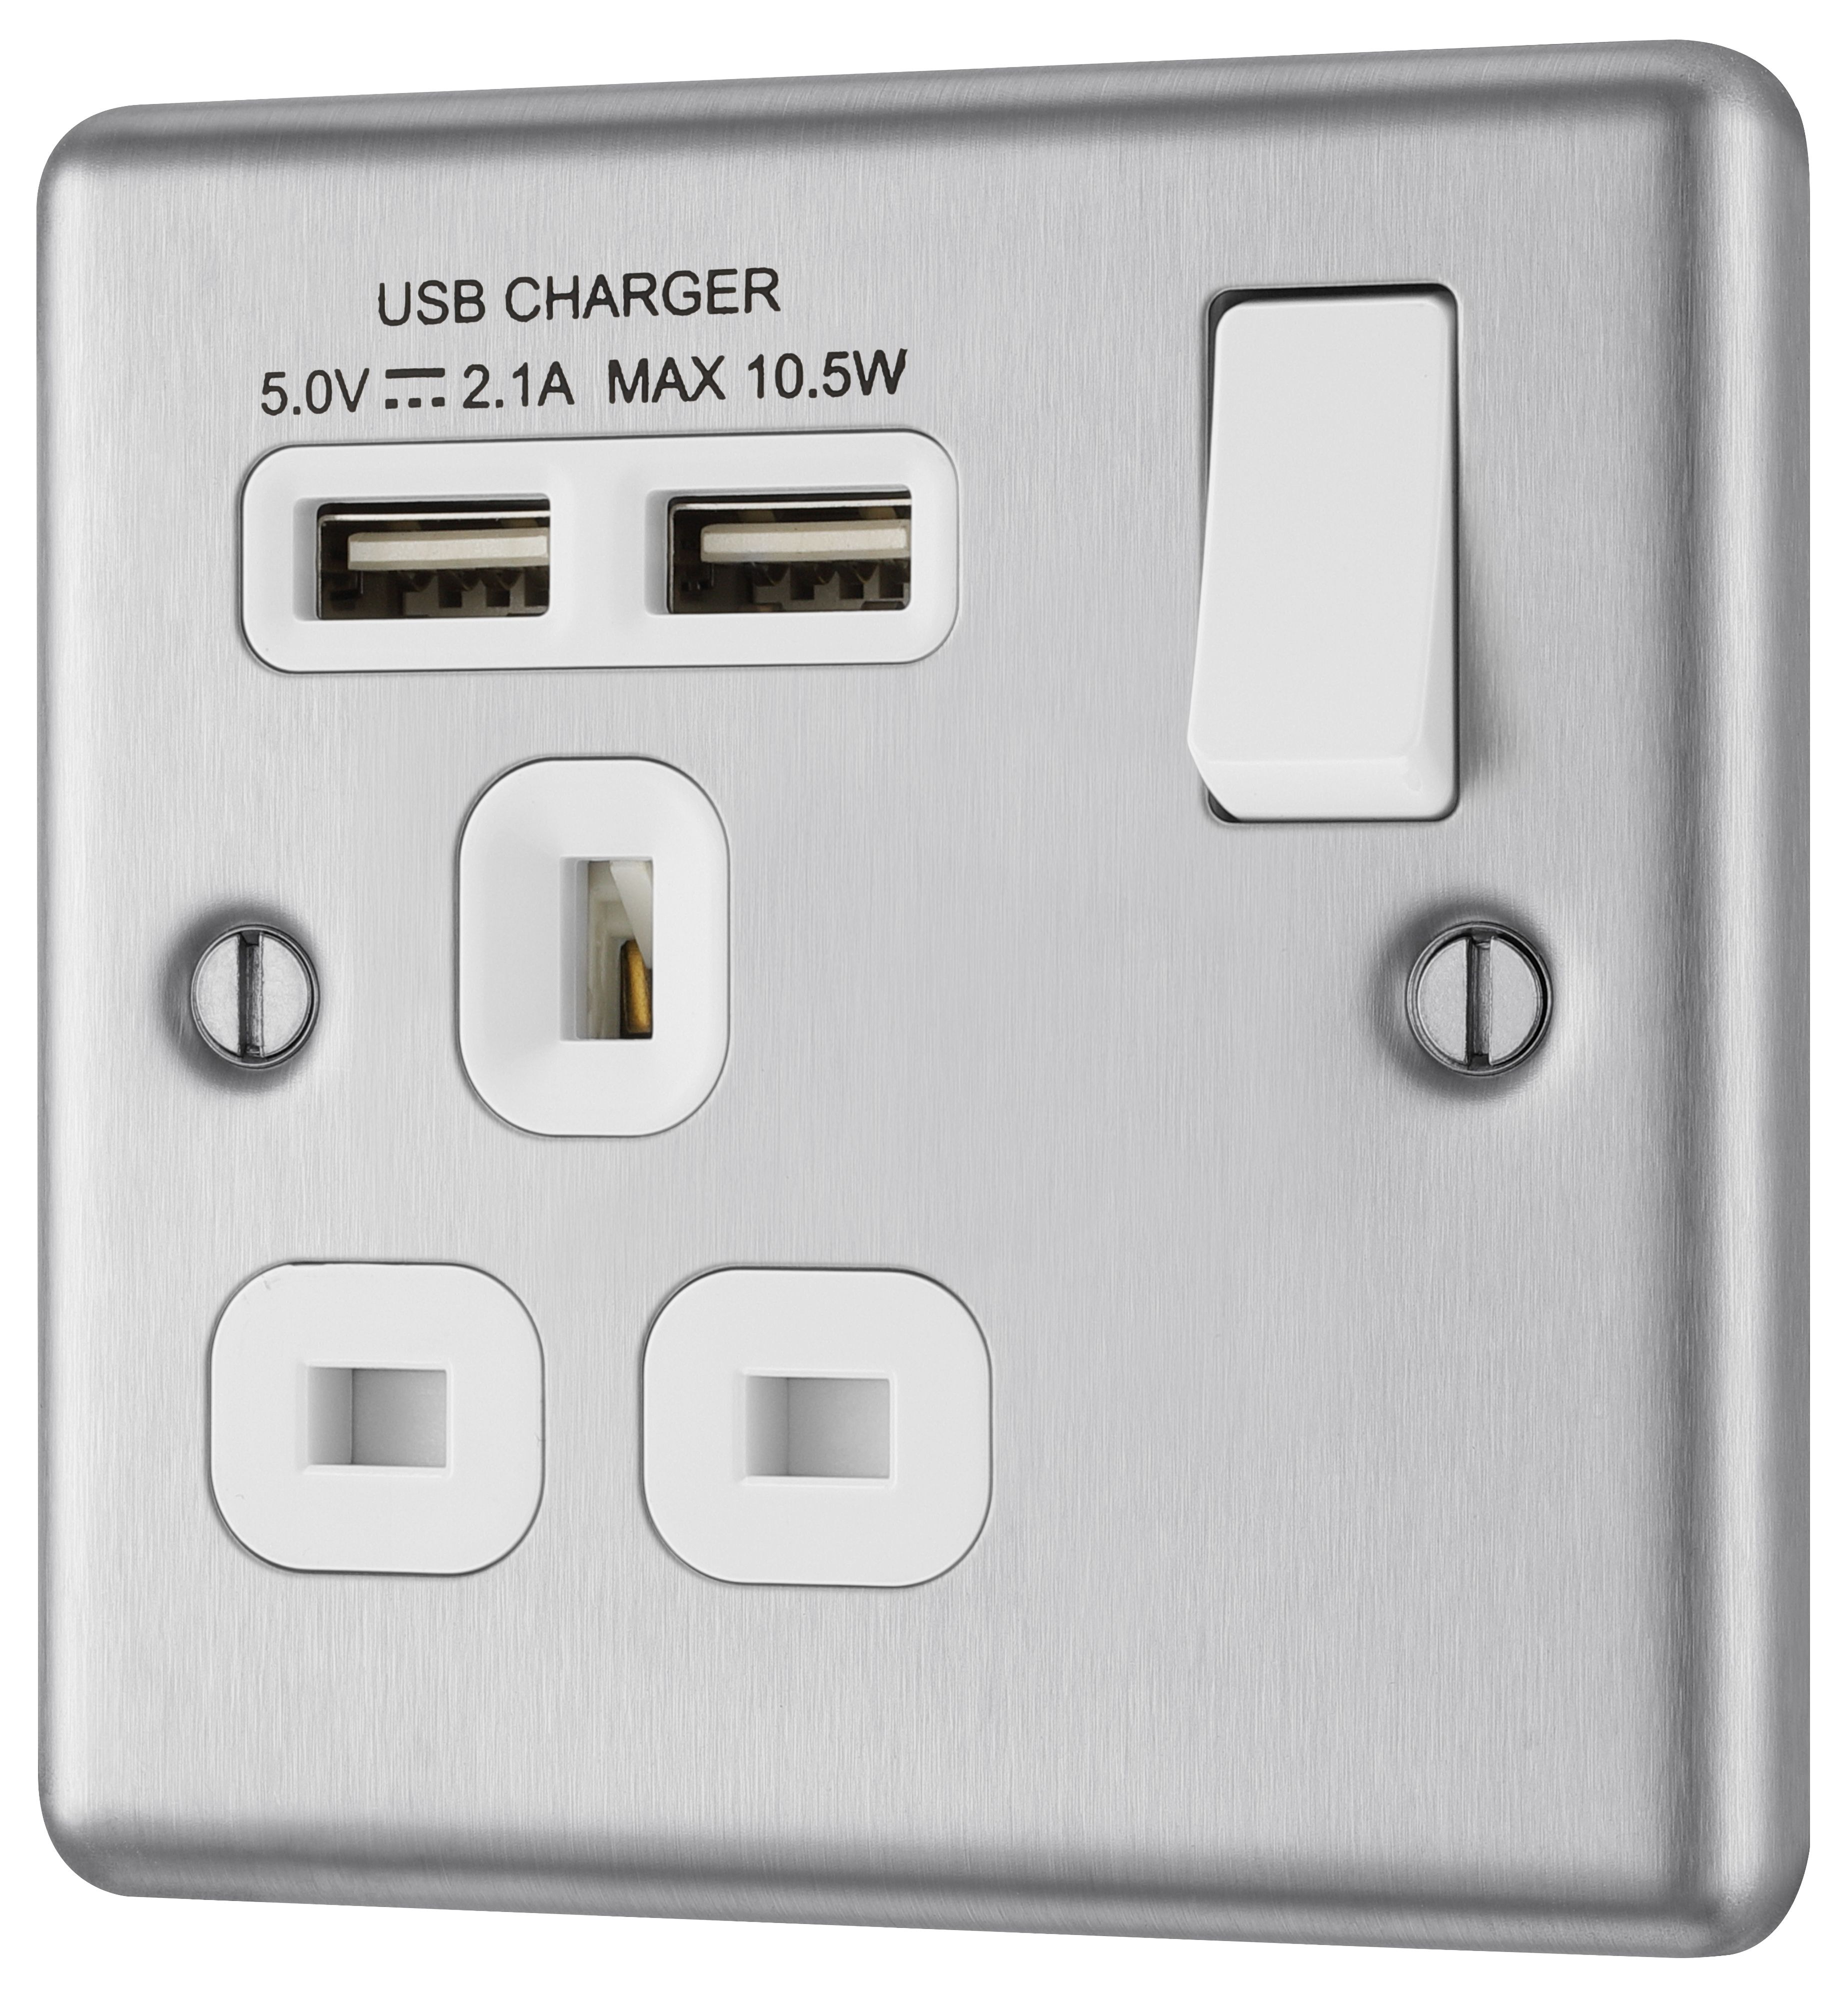 GoodHome Brushed Steel Single 13A Switched Socket with USB x2 & White inserts